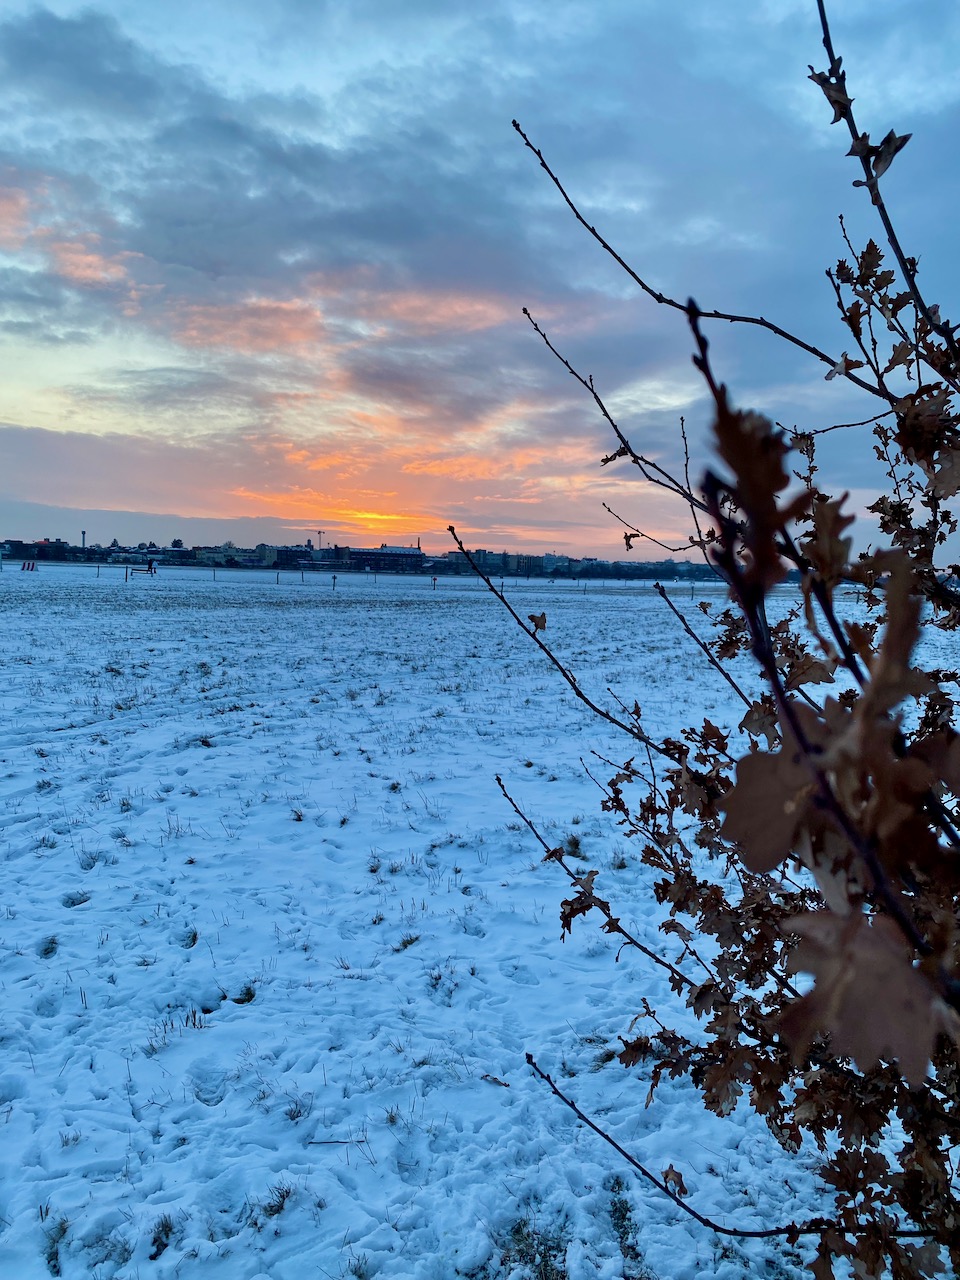 The best of the sunset sliver, snow covered field with a patch of bright orange and yellow.